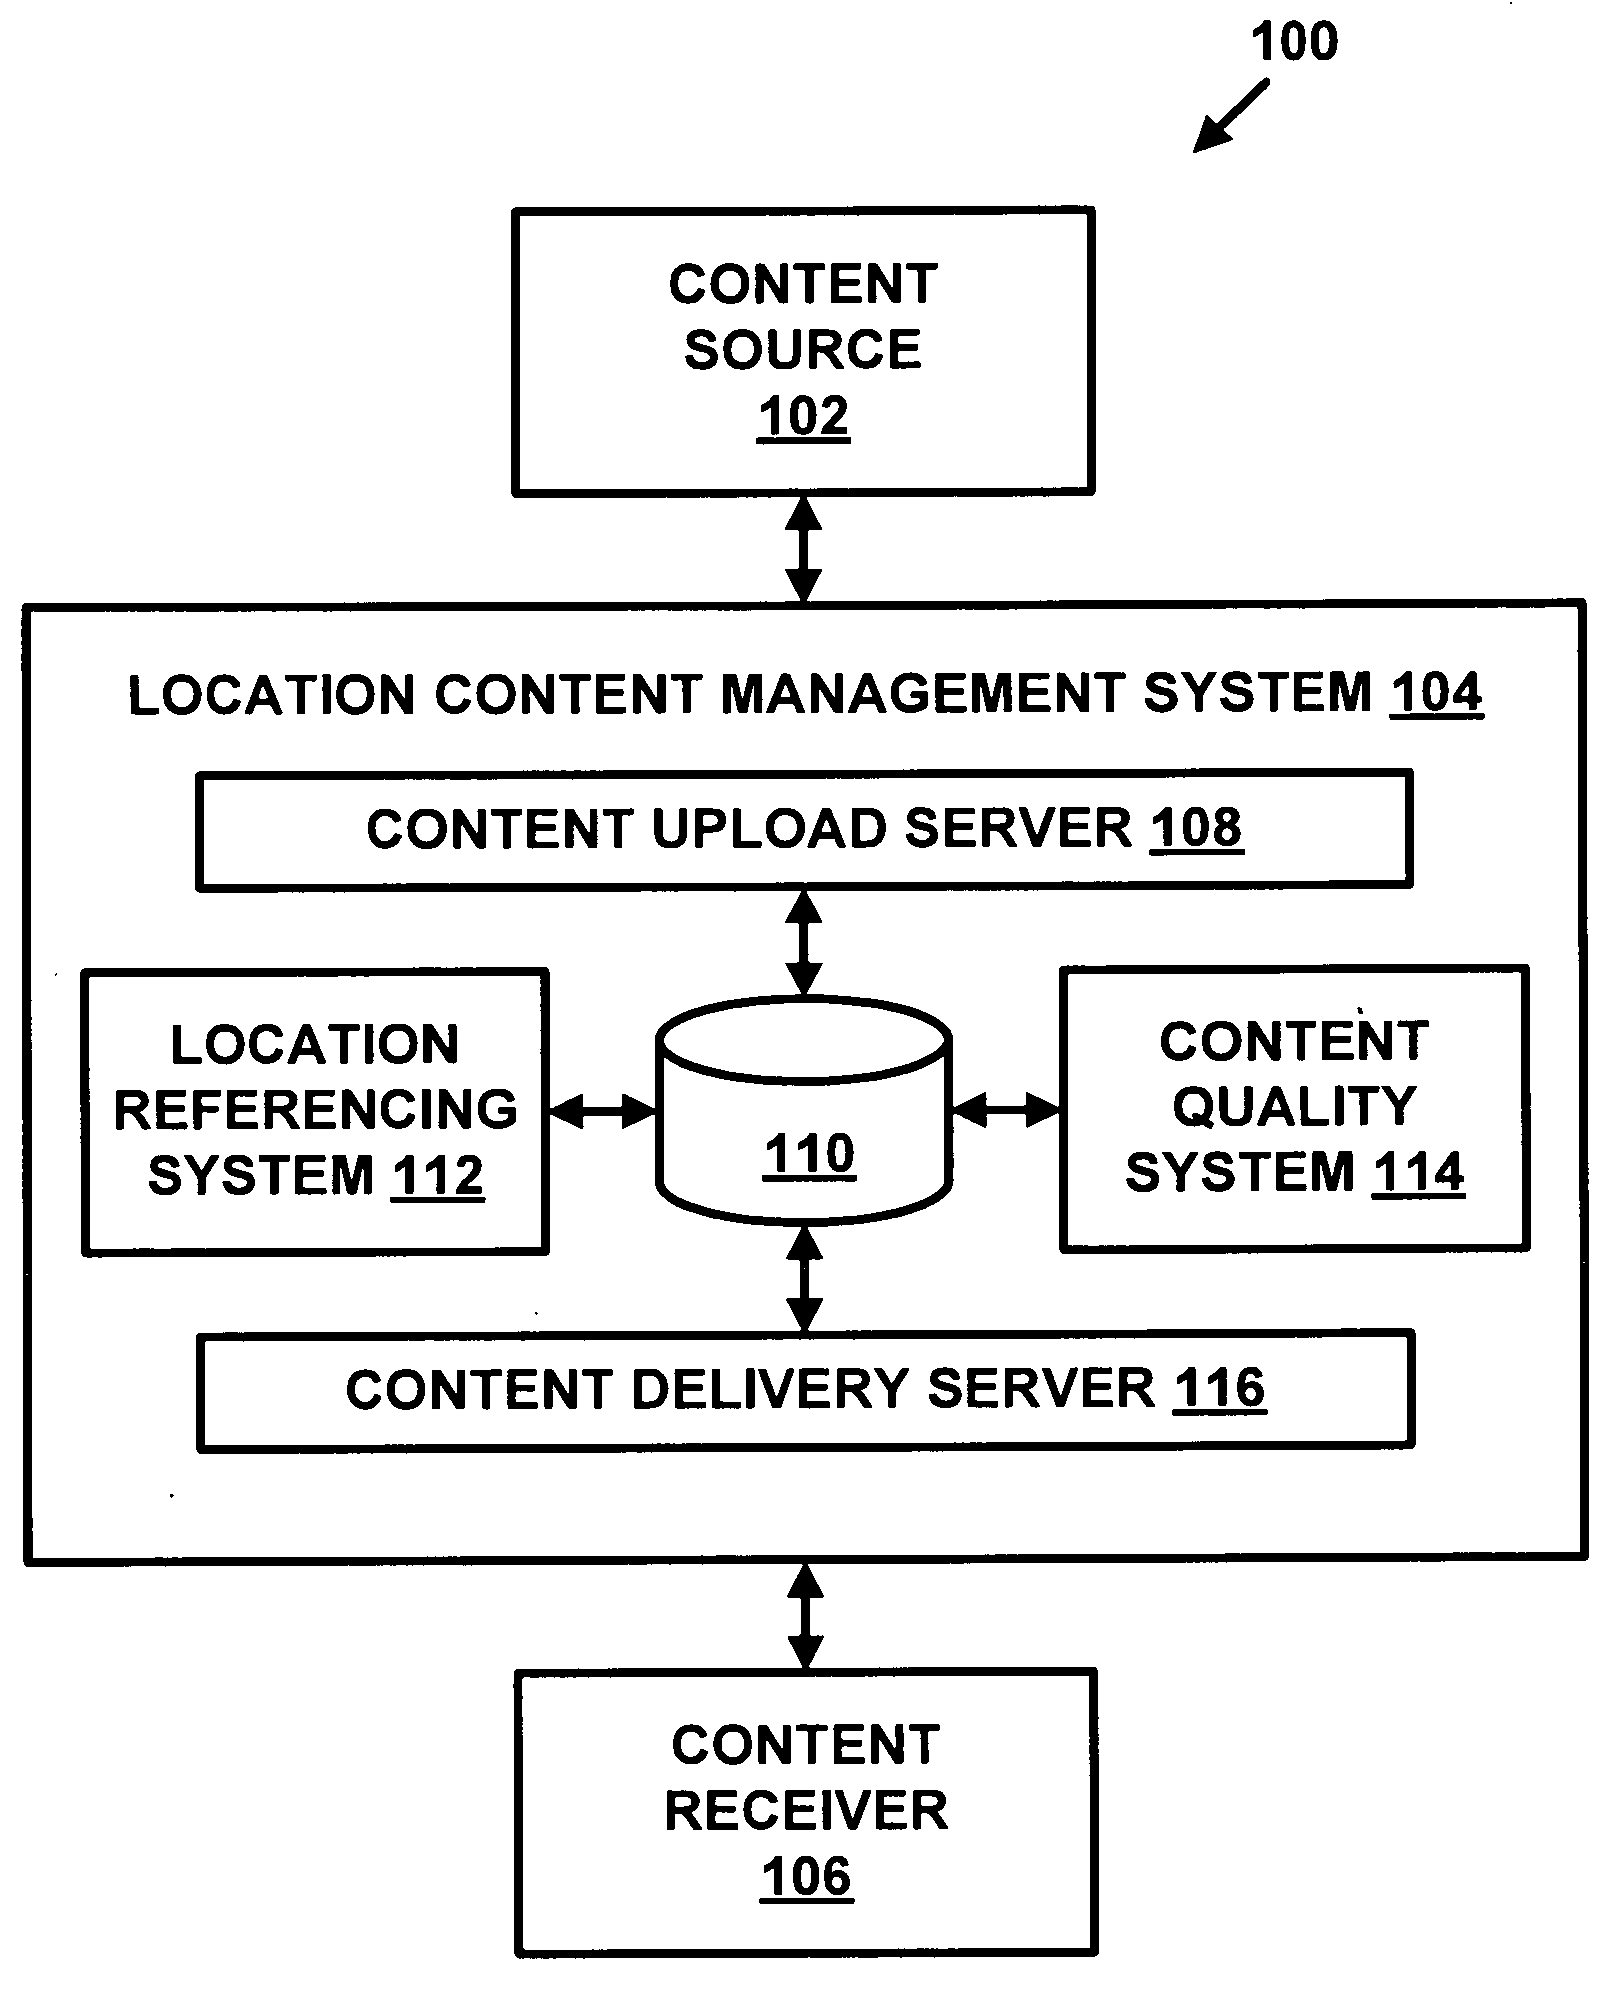 Method for Representing Linear Features in a Location Content Management System